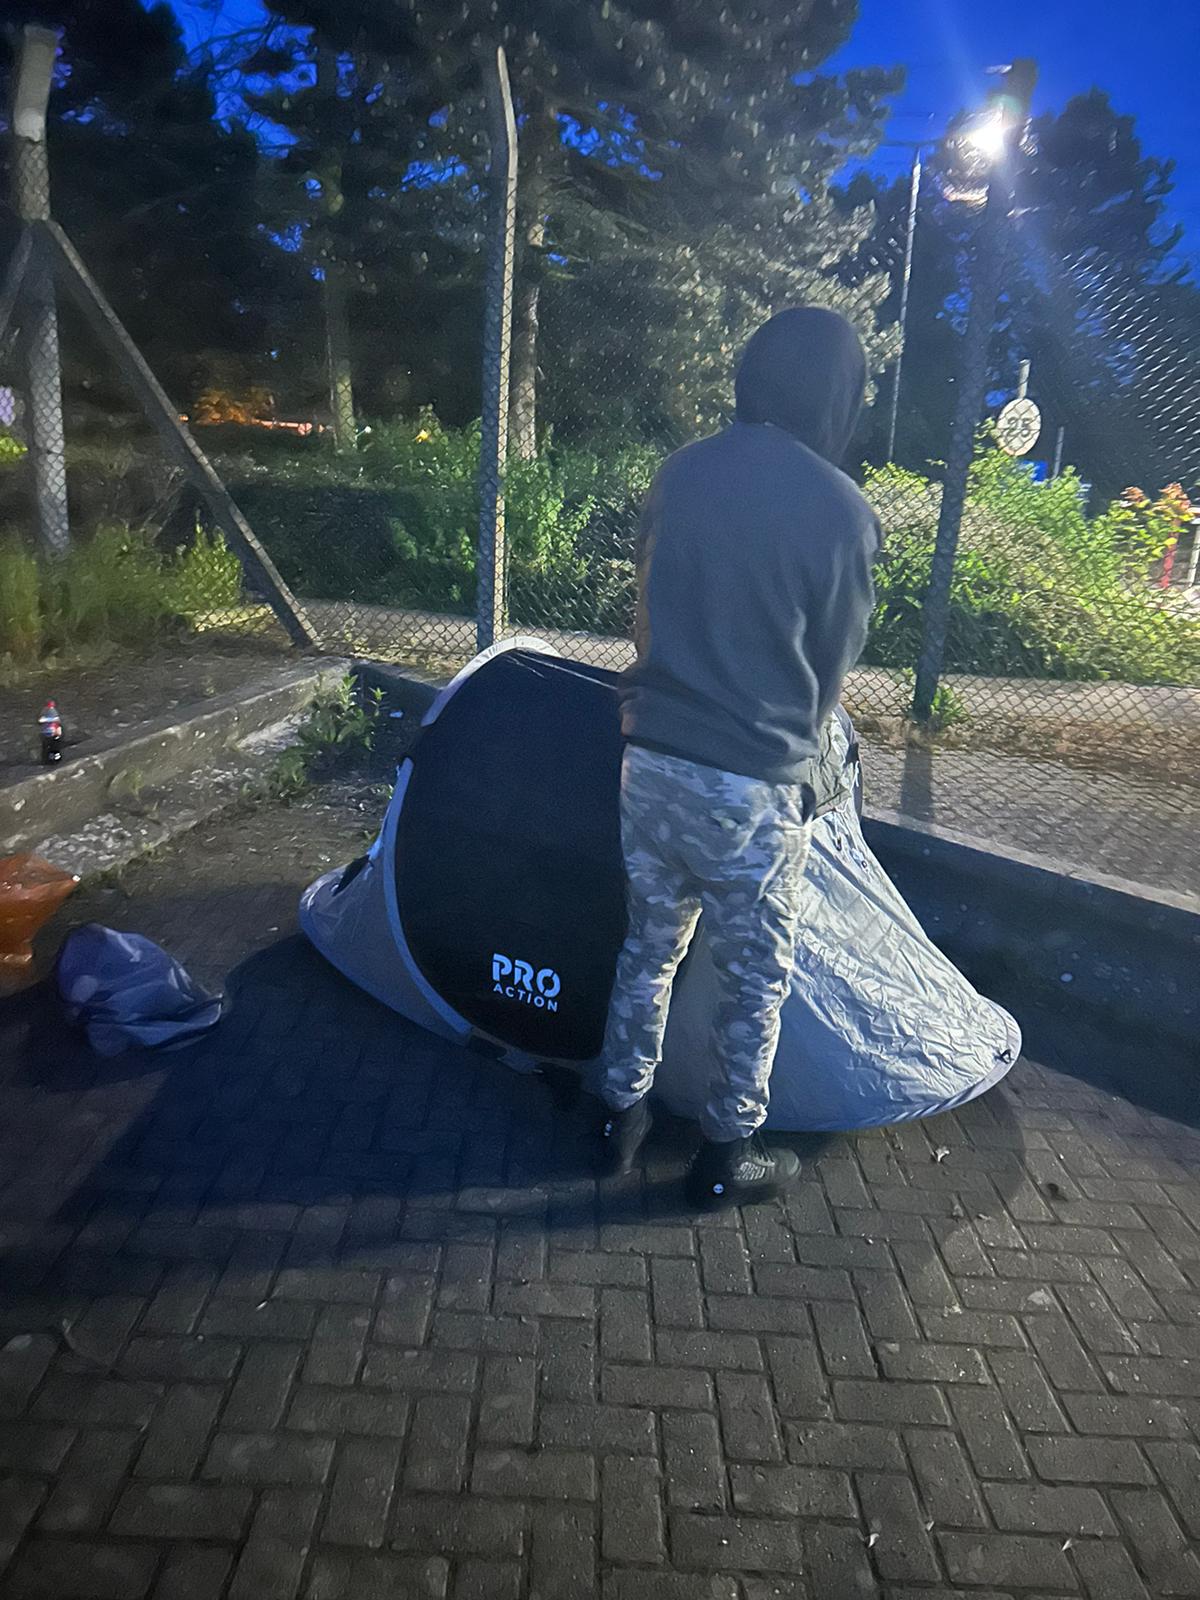 Recently a number of asylum seekers were forced to sleep outside Wethersfield in tents because they were not allowed back in